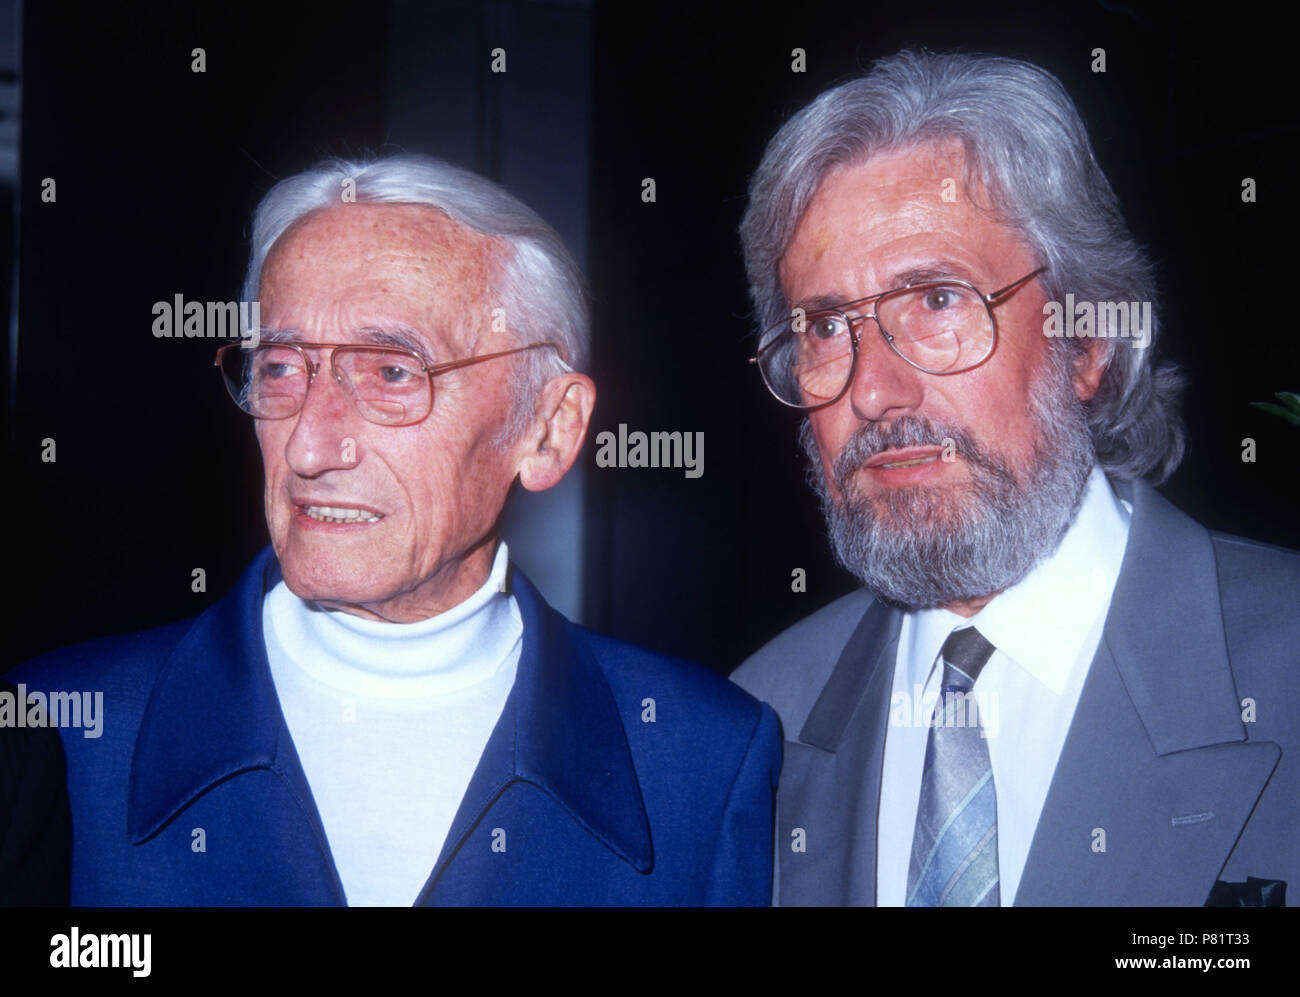 BEVERLY HILLS, CA - JANUARY 28: (L-R) French explorer.conservationist  Jacques Cousteau and his son French Explorer Jean-Michel Cousteau attend  the screening of 'An Evening With Cousteau' on January 28, 1992 at the